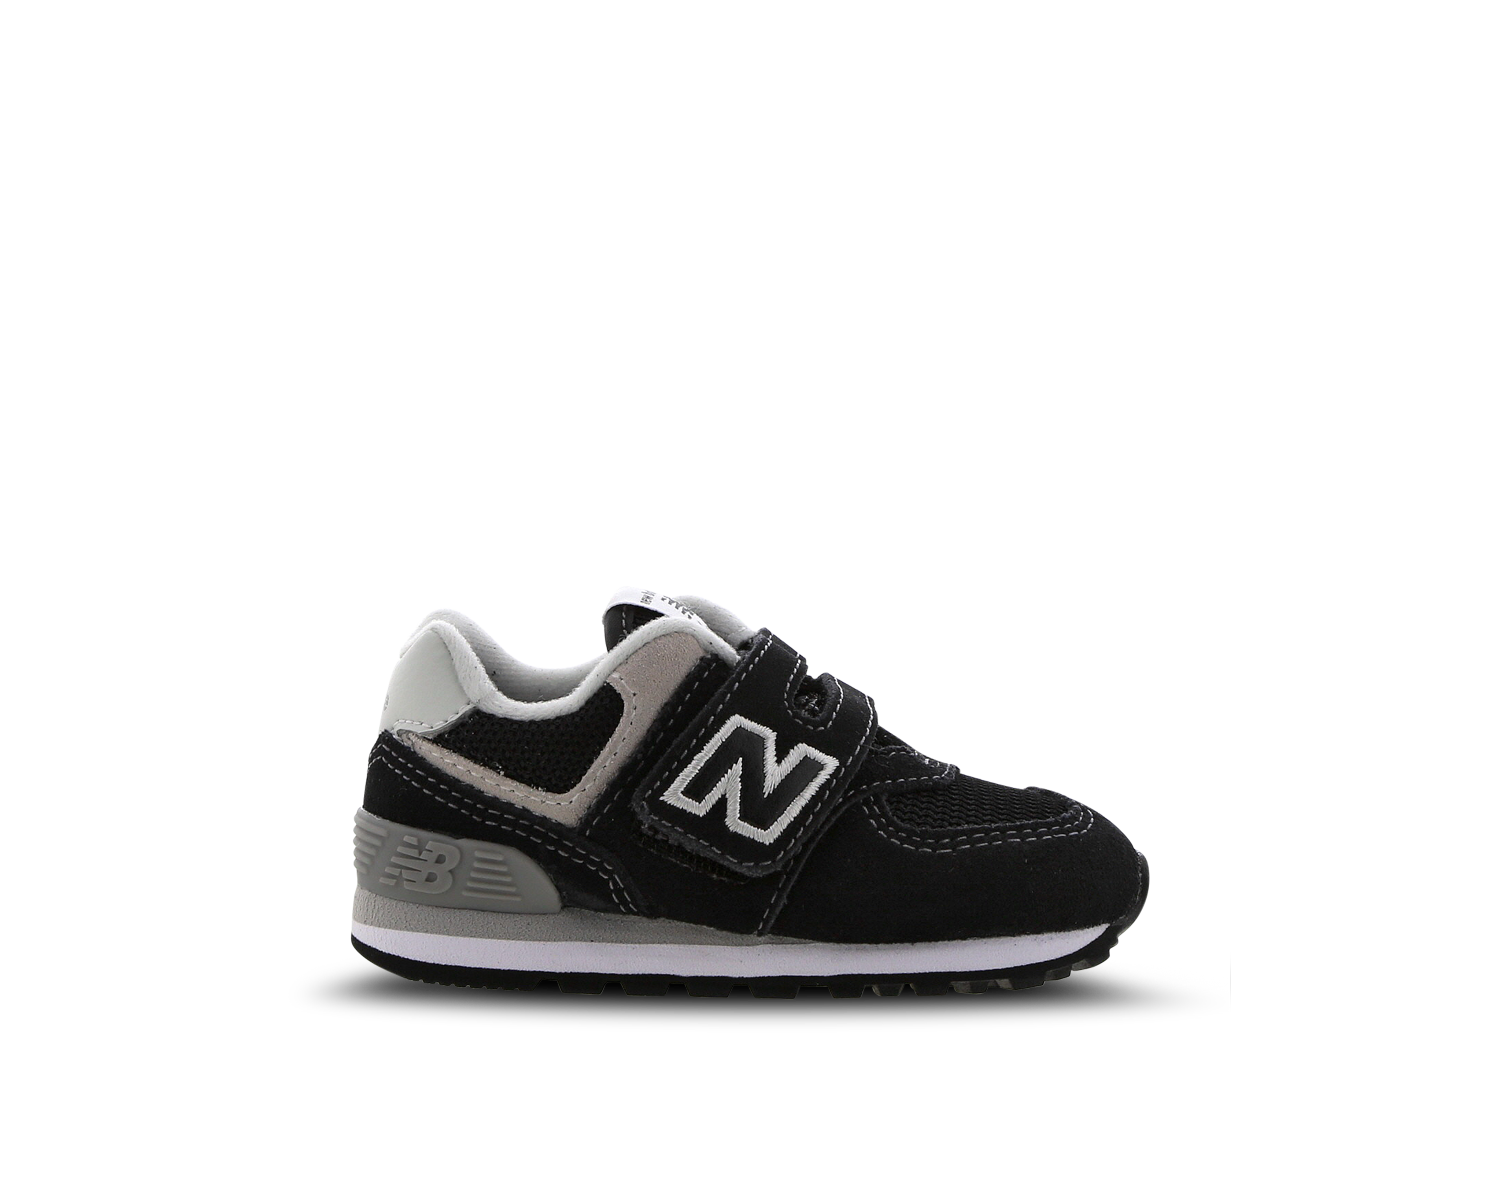 new balance baby shoes hk